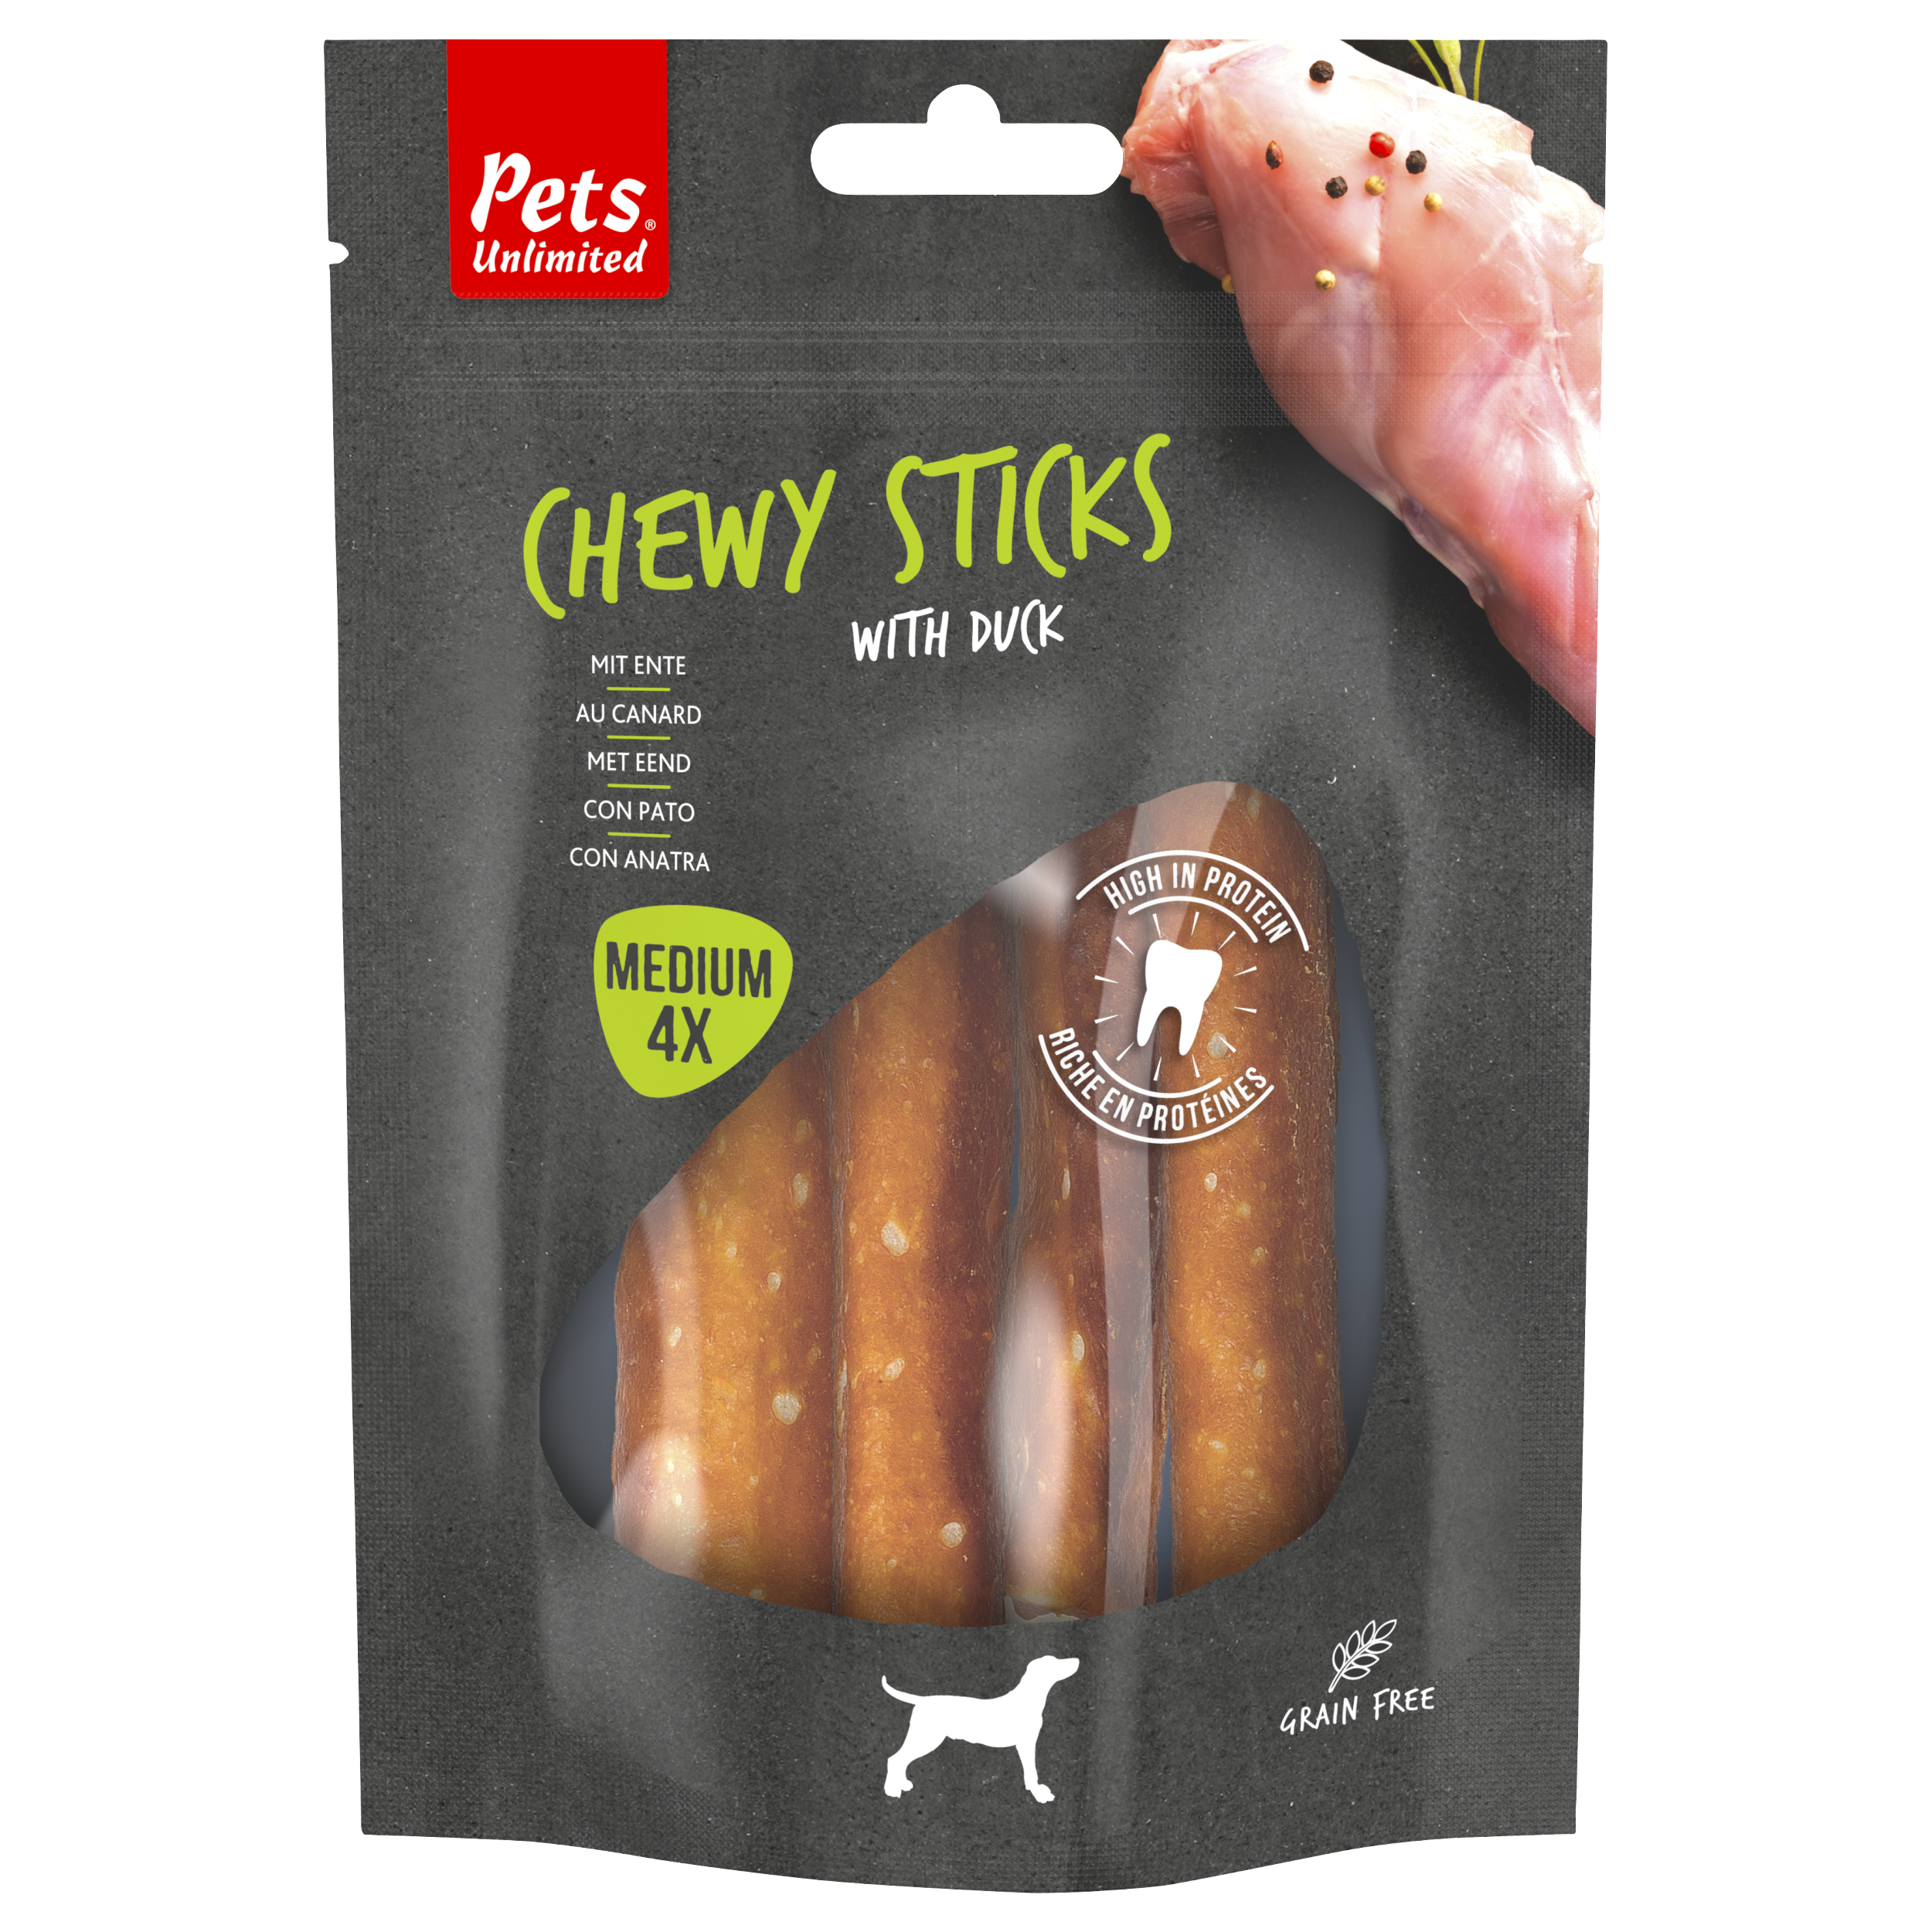 Chewy stick with duck medium, 4 pieces